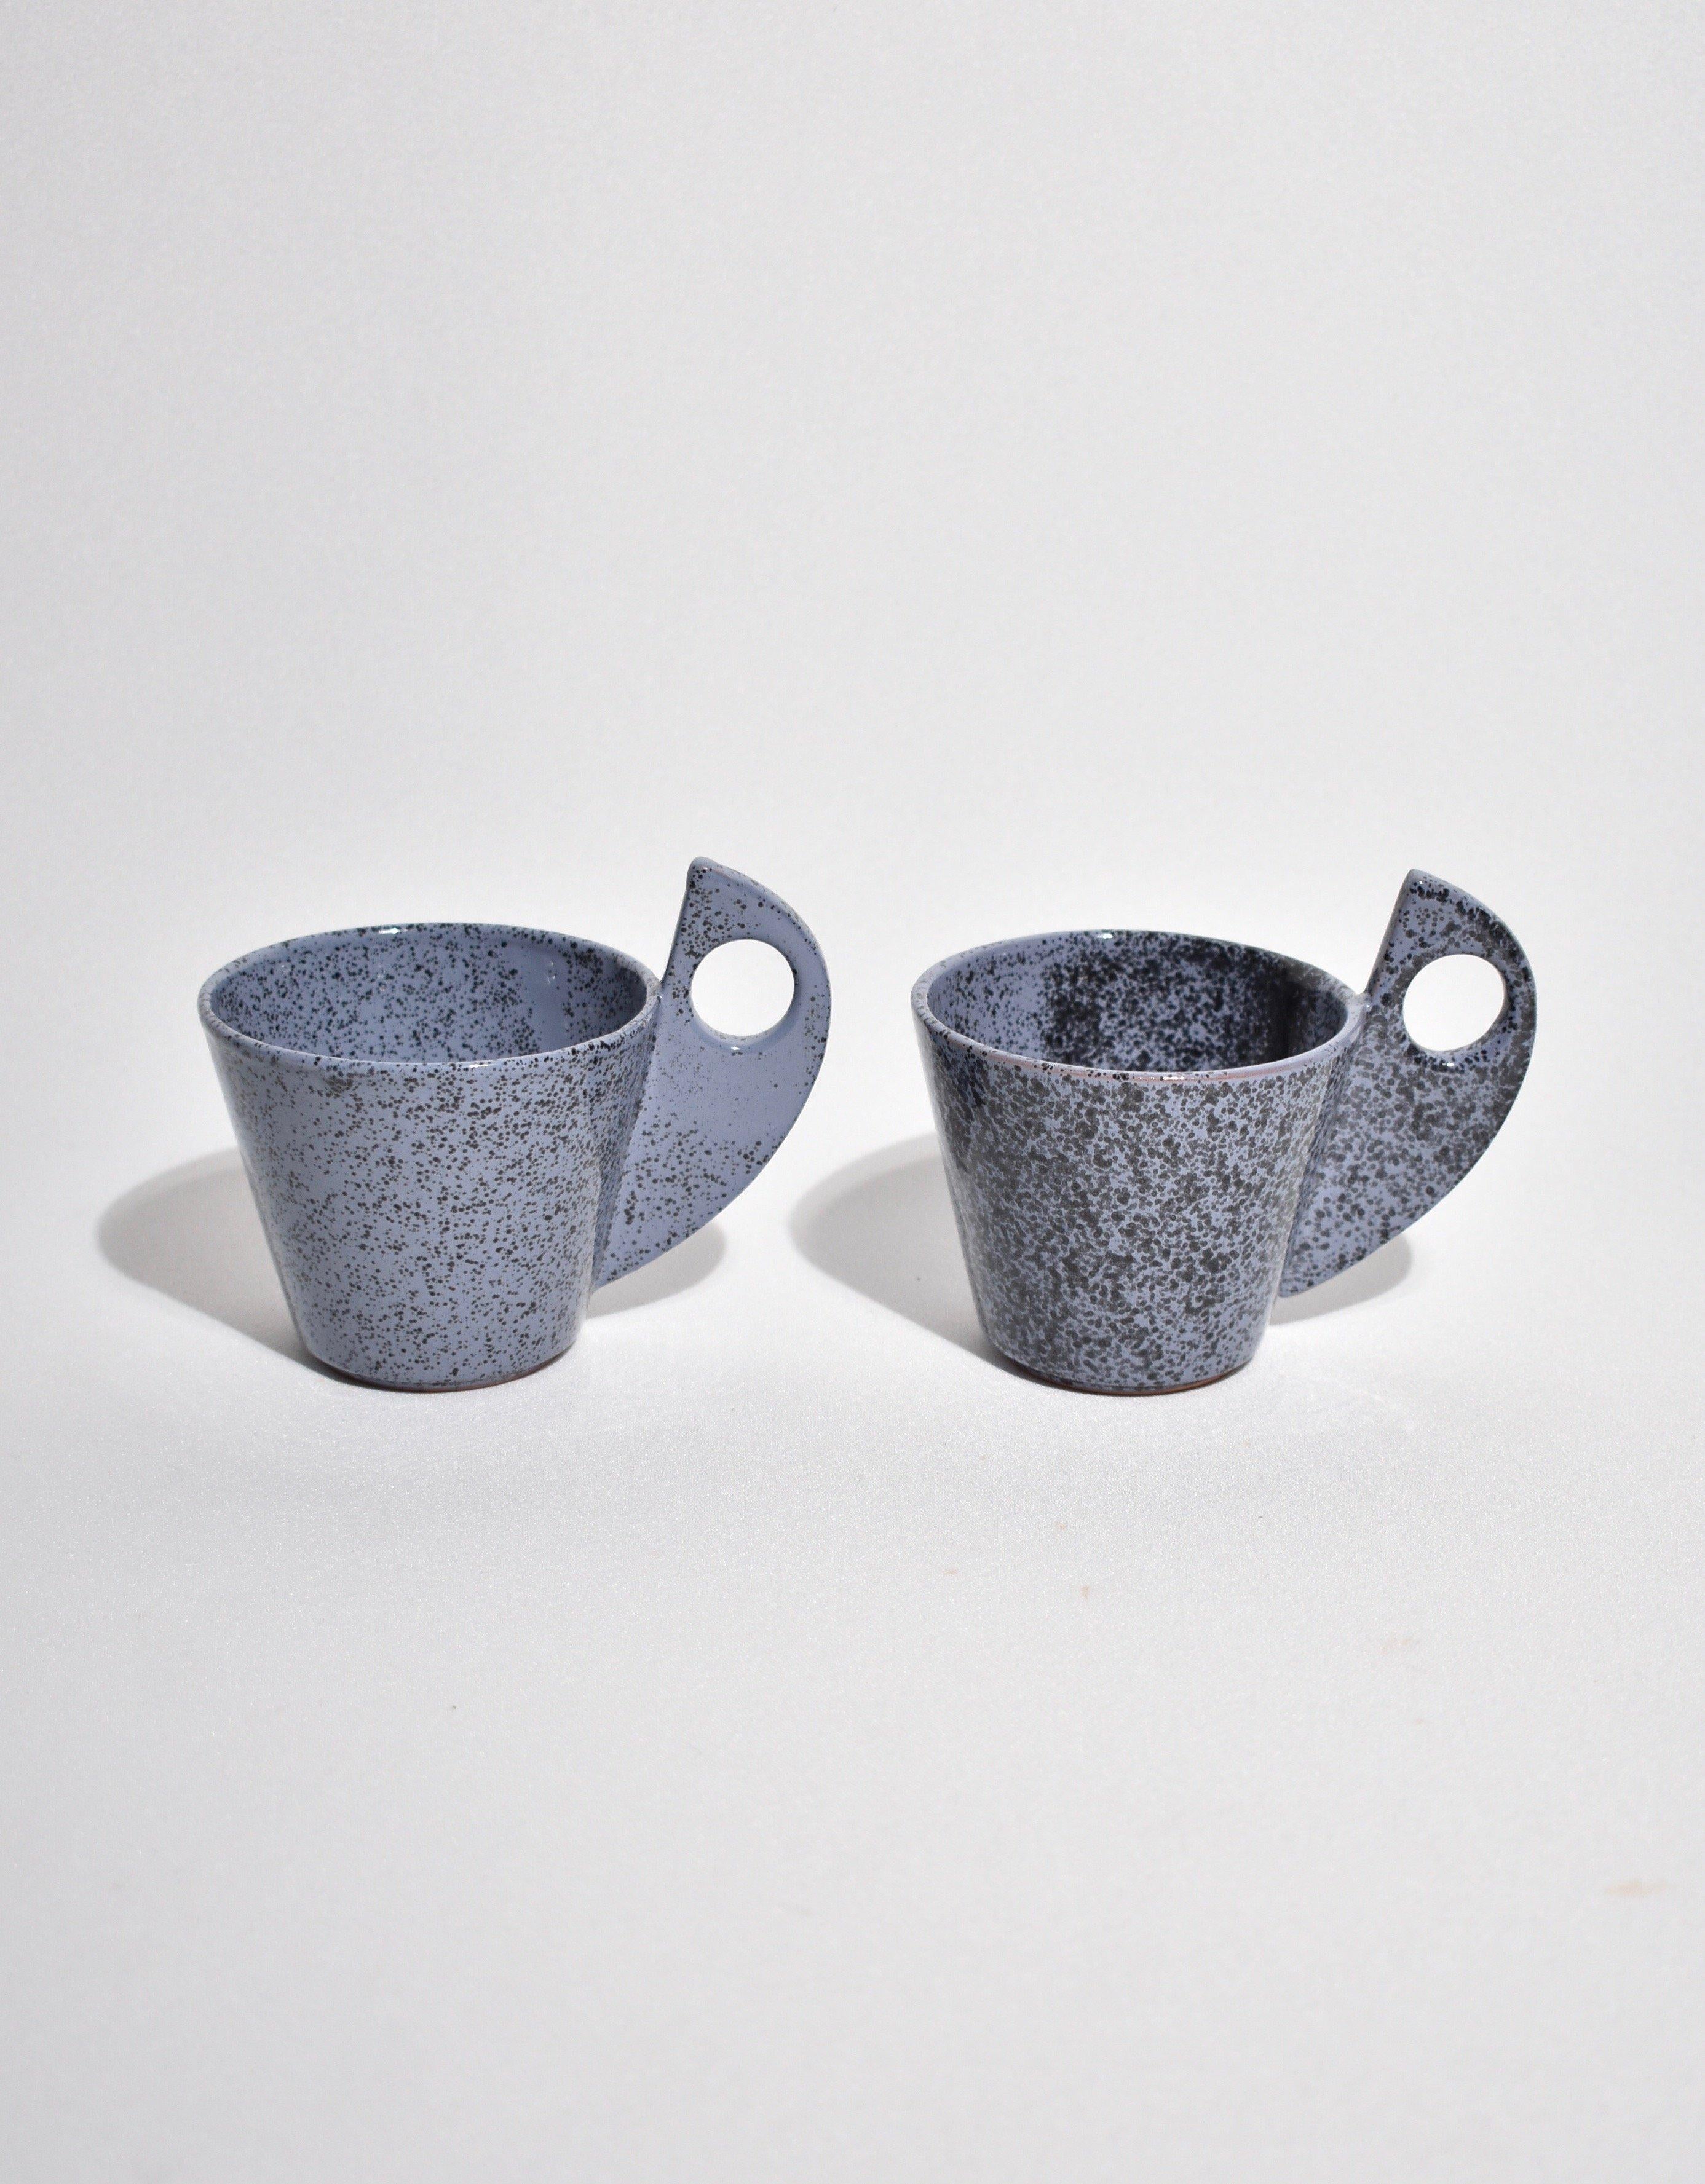 Rare, sculptural ceramic tea cup set in blue speckle pattern. Includes a set of two cups with saucers, signed. 

Dimensions:
Width: cup 4.5 in (11.43 cm) saucer 5.25 in (13.33 cm).

 